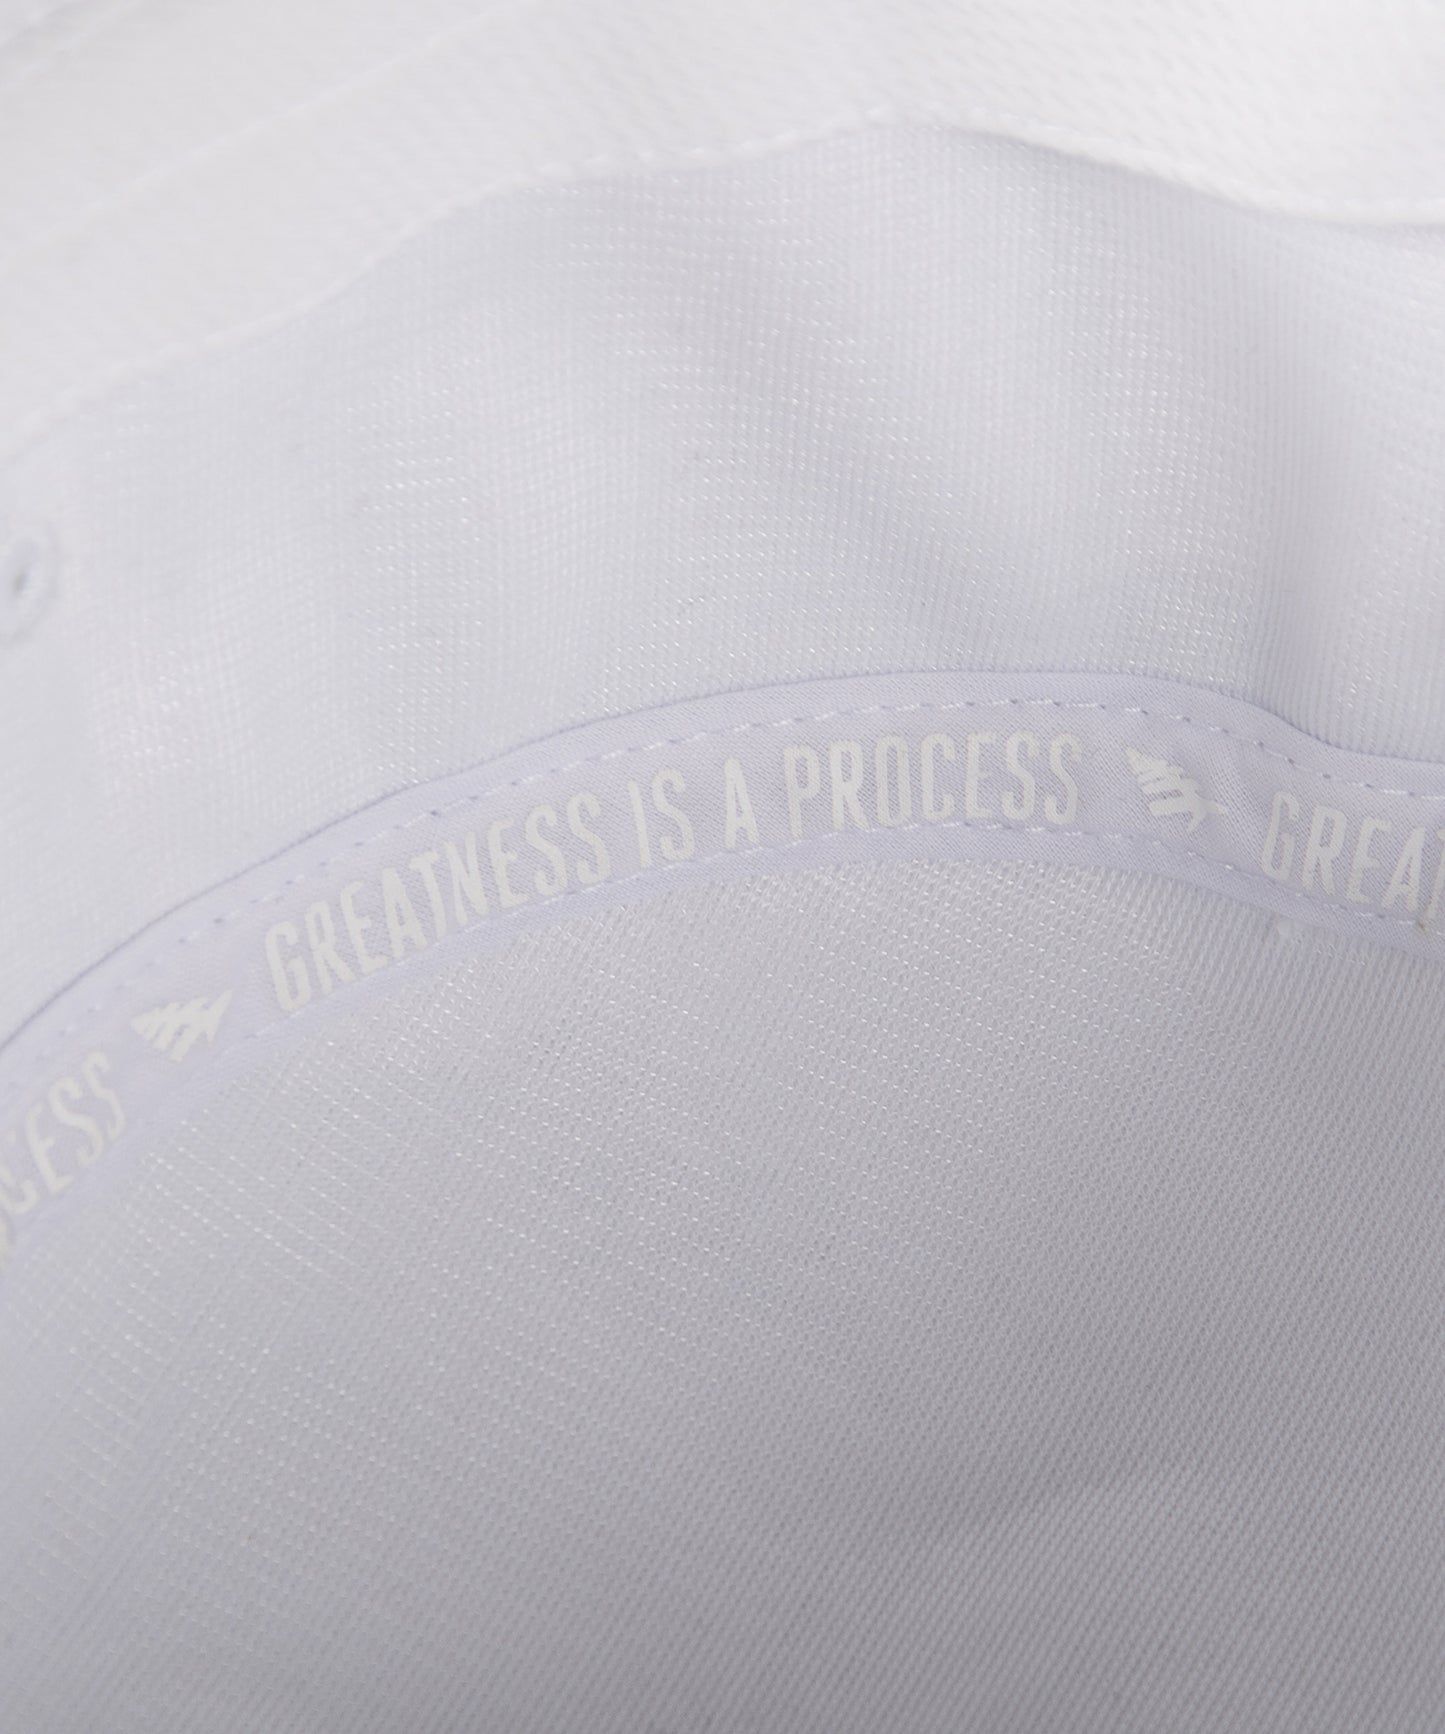 CUSTOM_ALT_TEXT: GREATNESS IS A PROCESS interior taping on Paper Planes Jacquard Terry Cloth Bucket Hat color White.